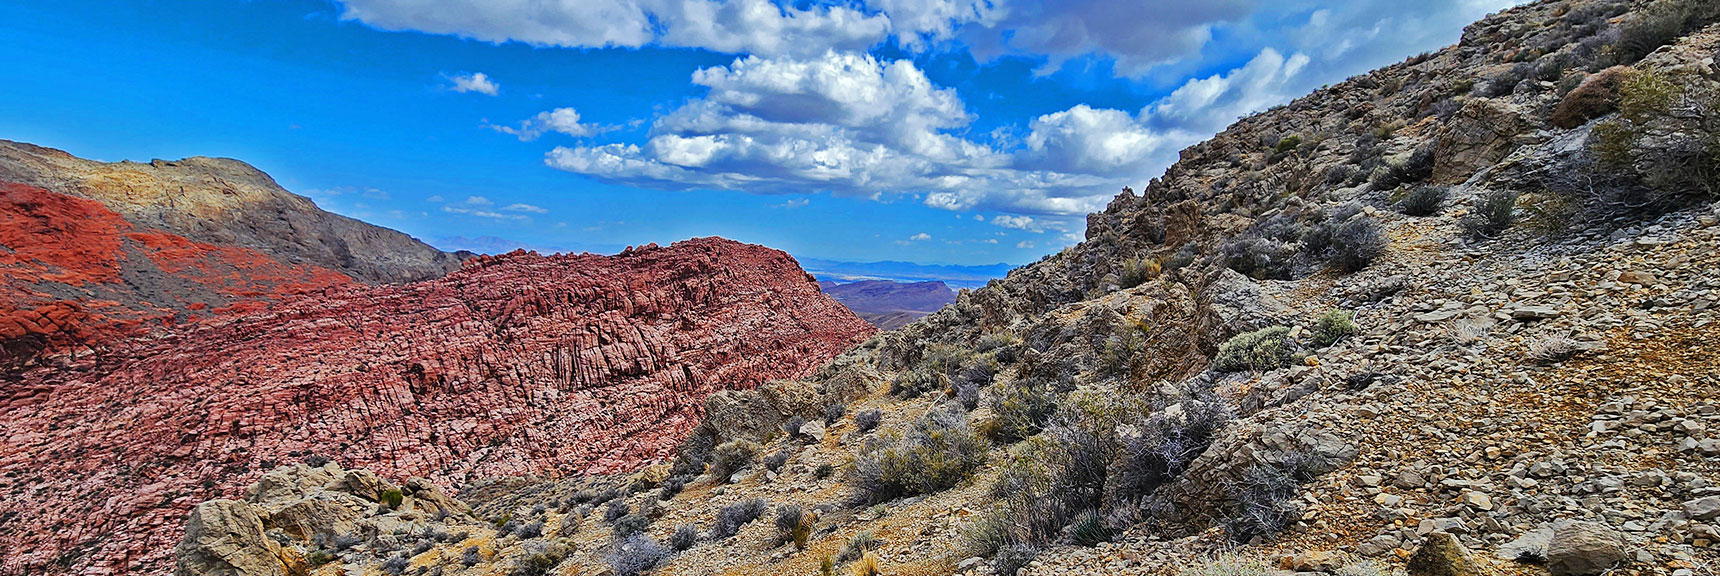 Pink Goblin Pass is Below the Pink Kraft Mt. Ahead | Ash Canyon to Calico Tanks | Calico Basin and Red Rock Canyon, Nevada | David Smith | Las Vegas Area Trails